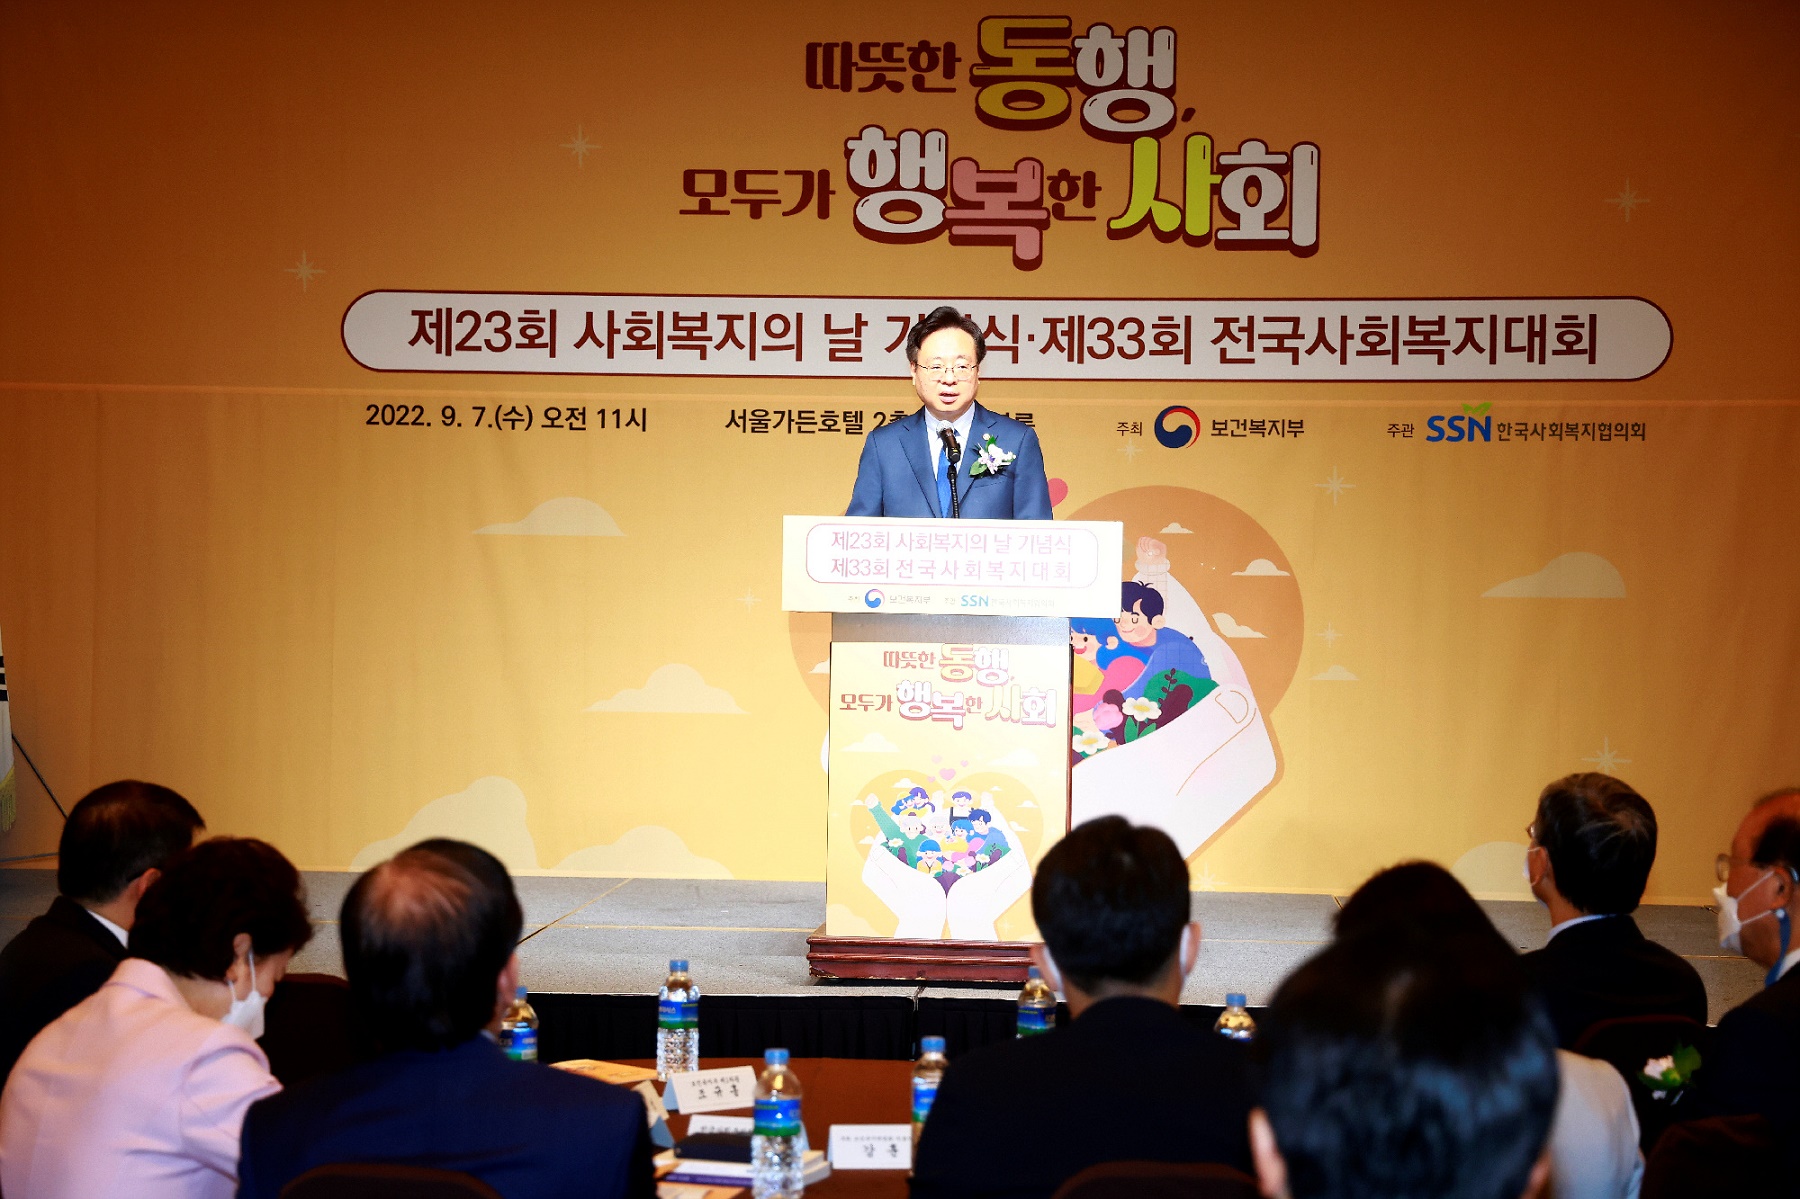 Ceremony held to commemorate the 23rd Social Welfare Day 사진11